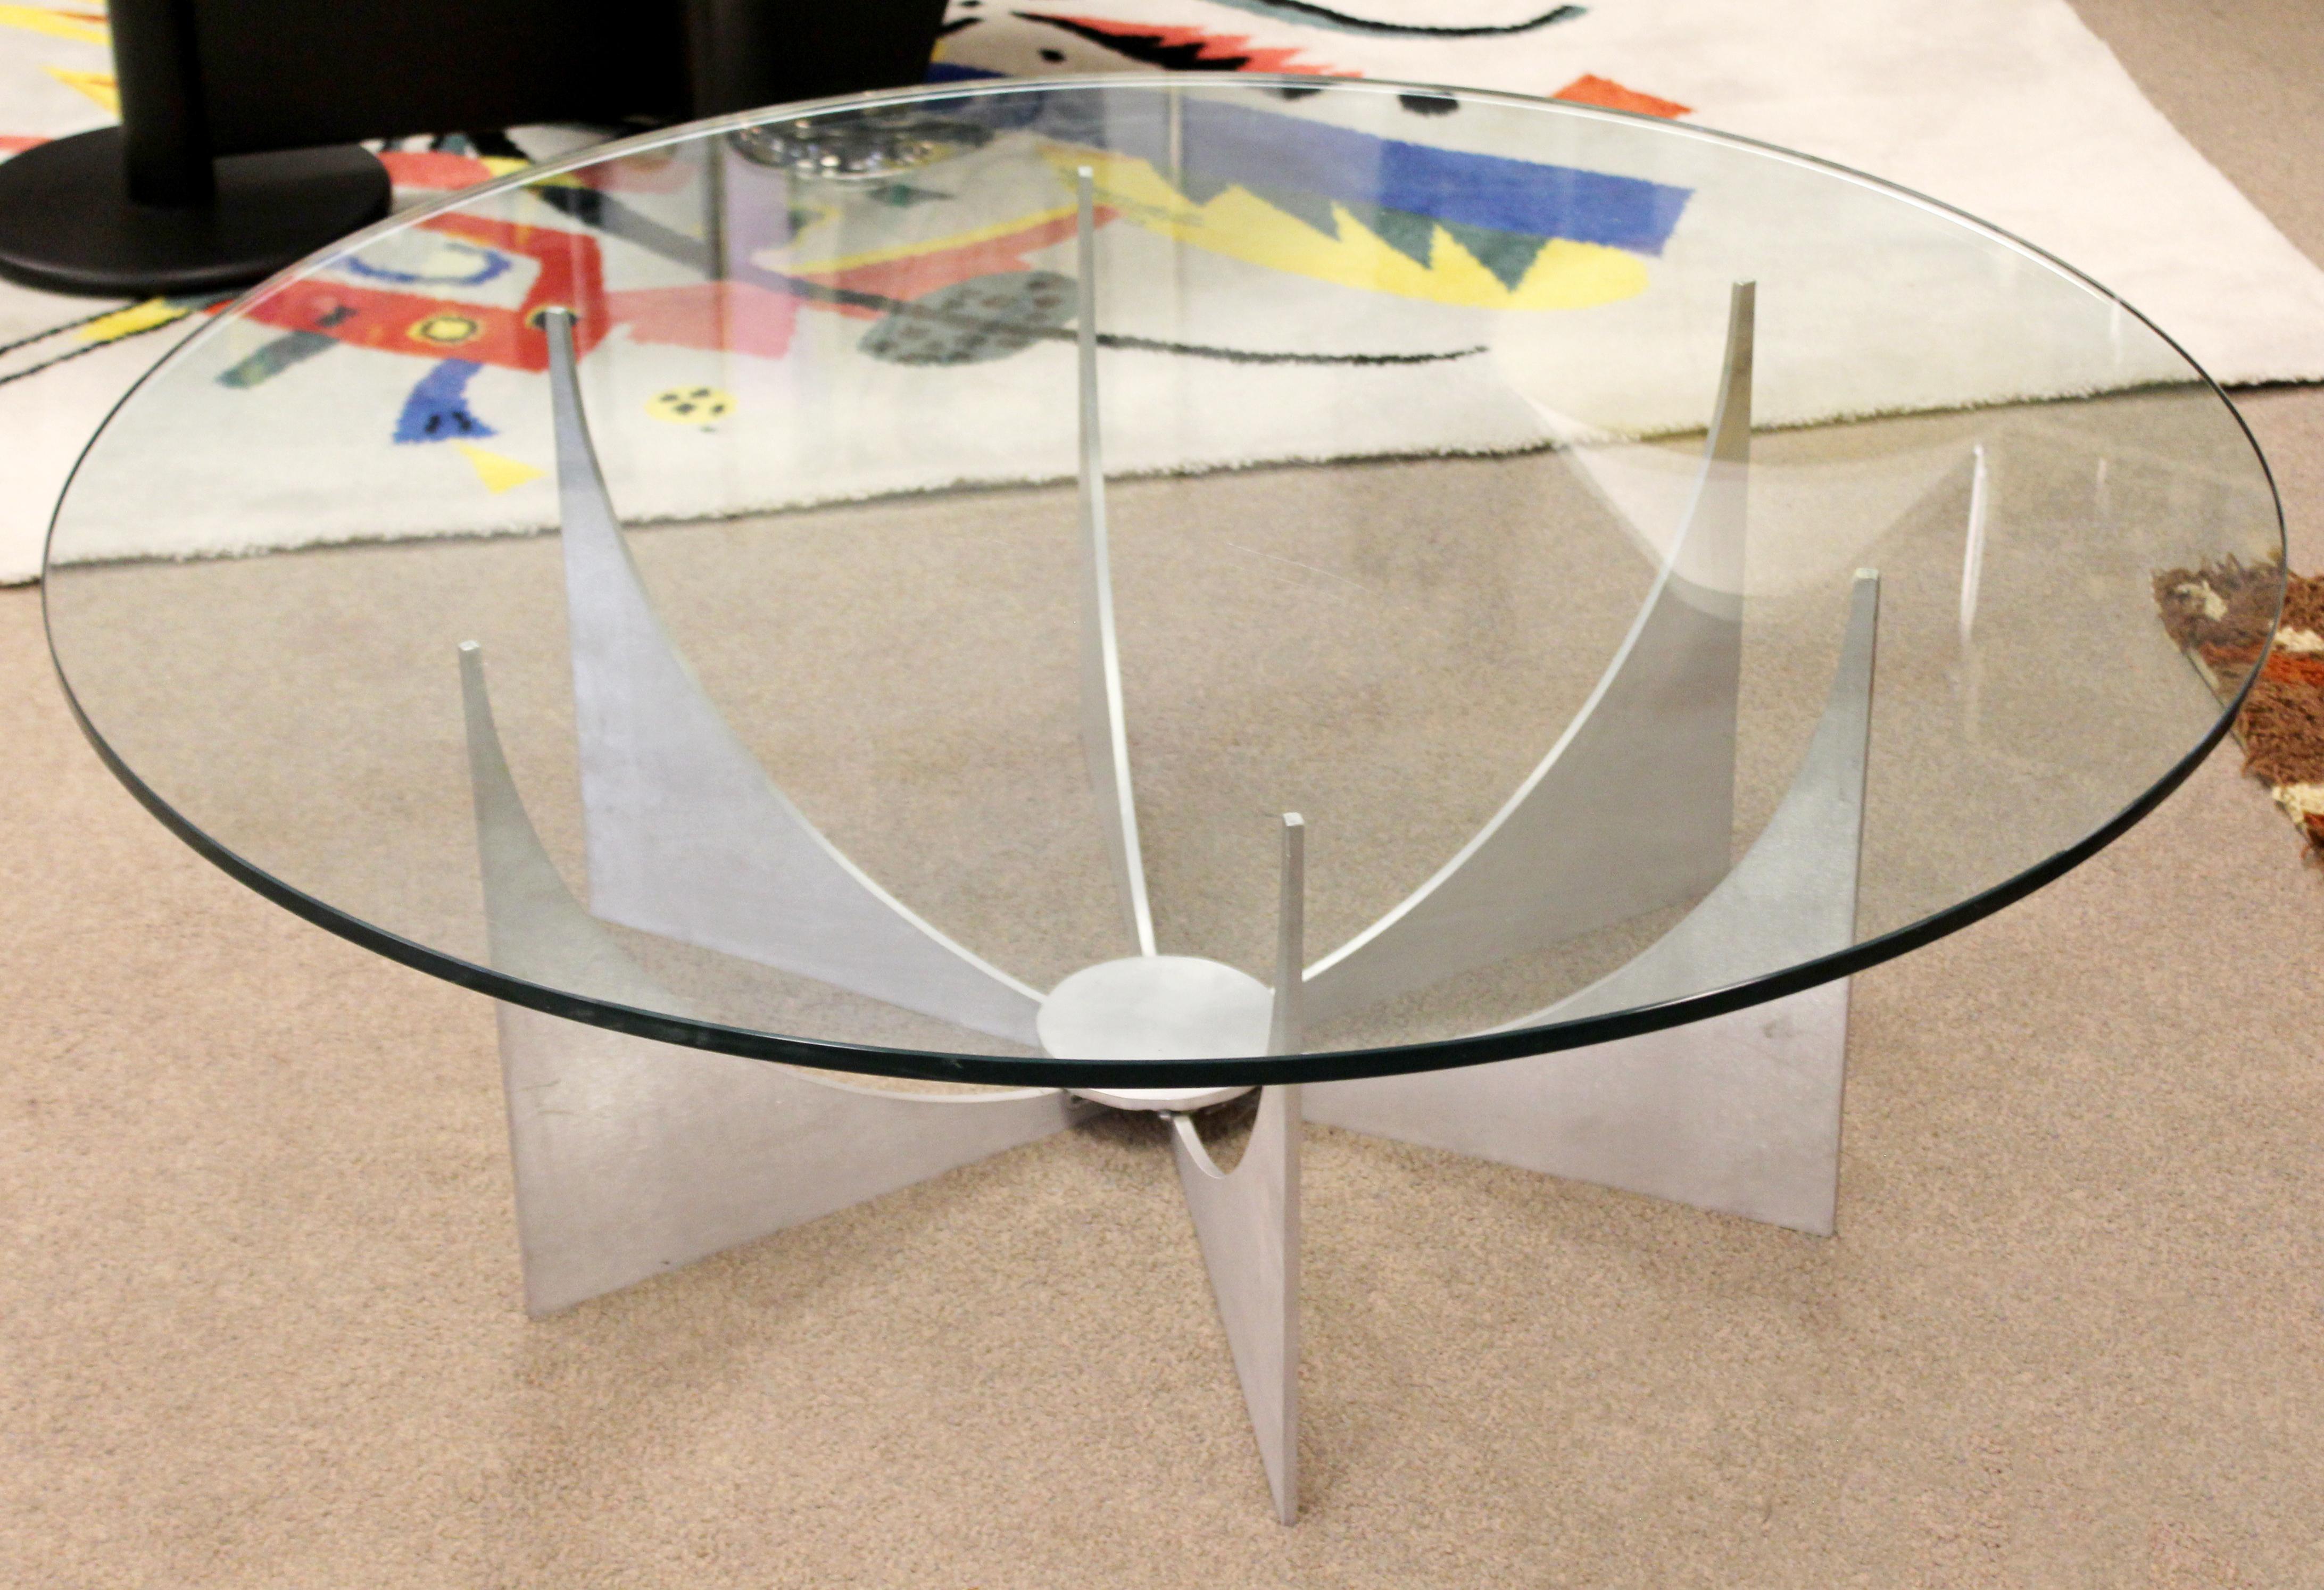 For your consideration is a Minimalist, round coffee table, made of brushed aluminum and with a glass top, by Donald Drumm, circa 1970s. In excellent condition. The dimensions are 44